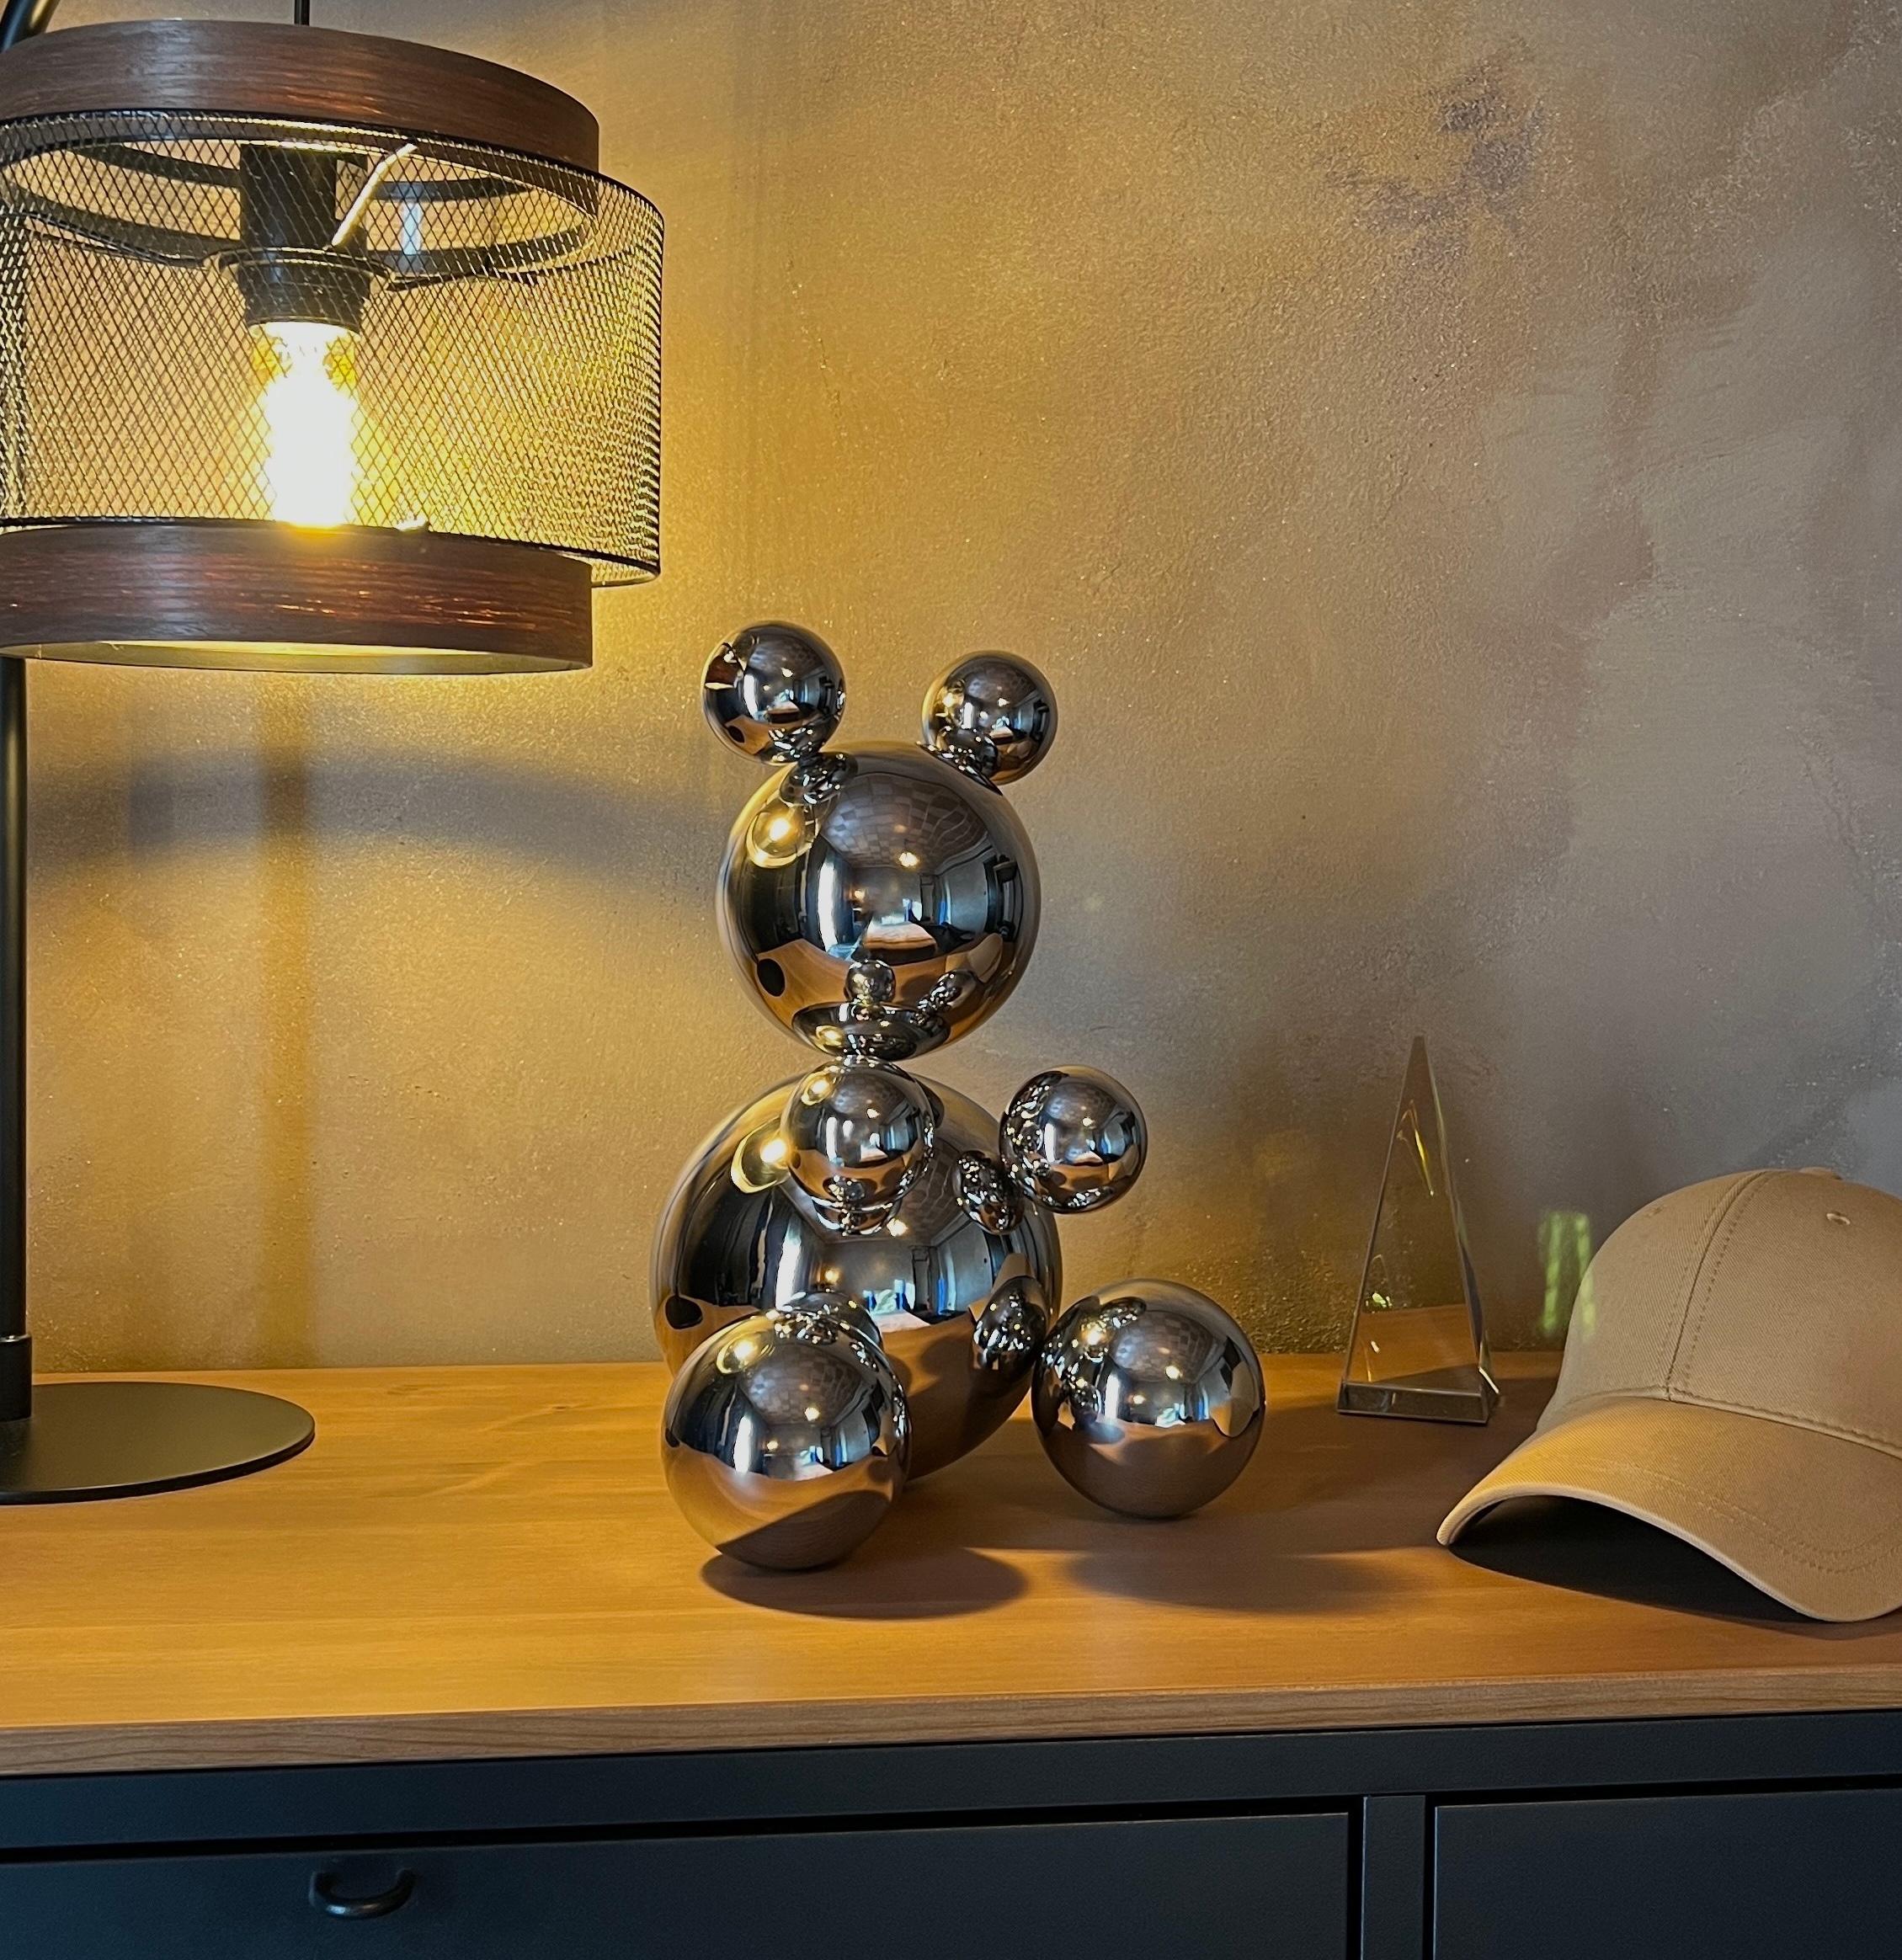 Middle Stainless Steel Bear 'Brian' Sculpture Minimalistic Animal 7